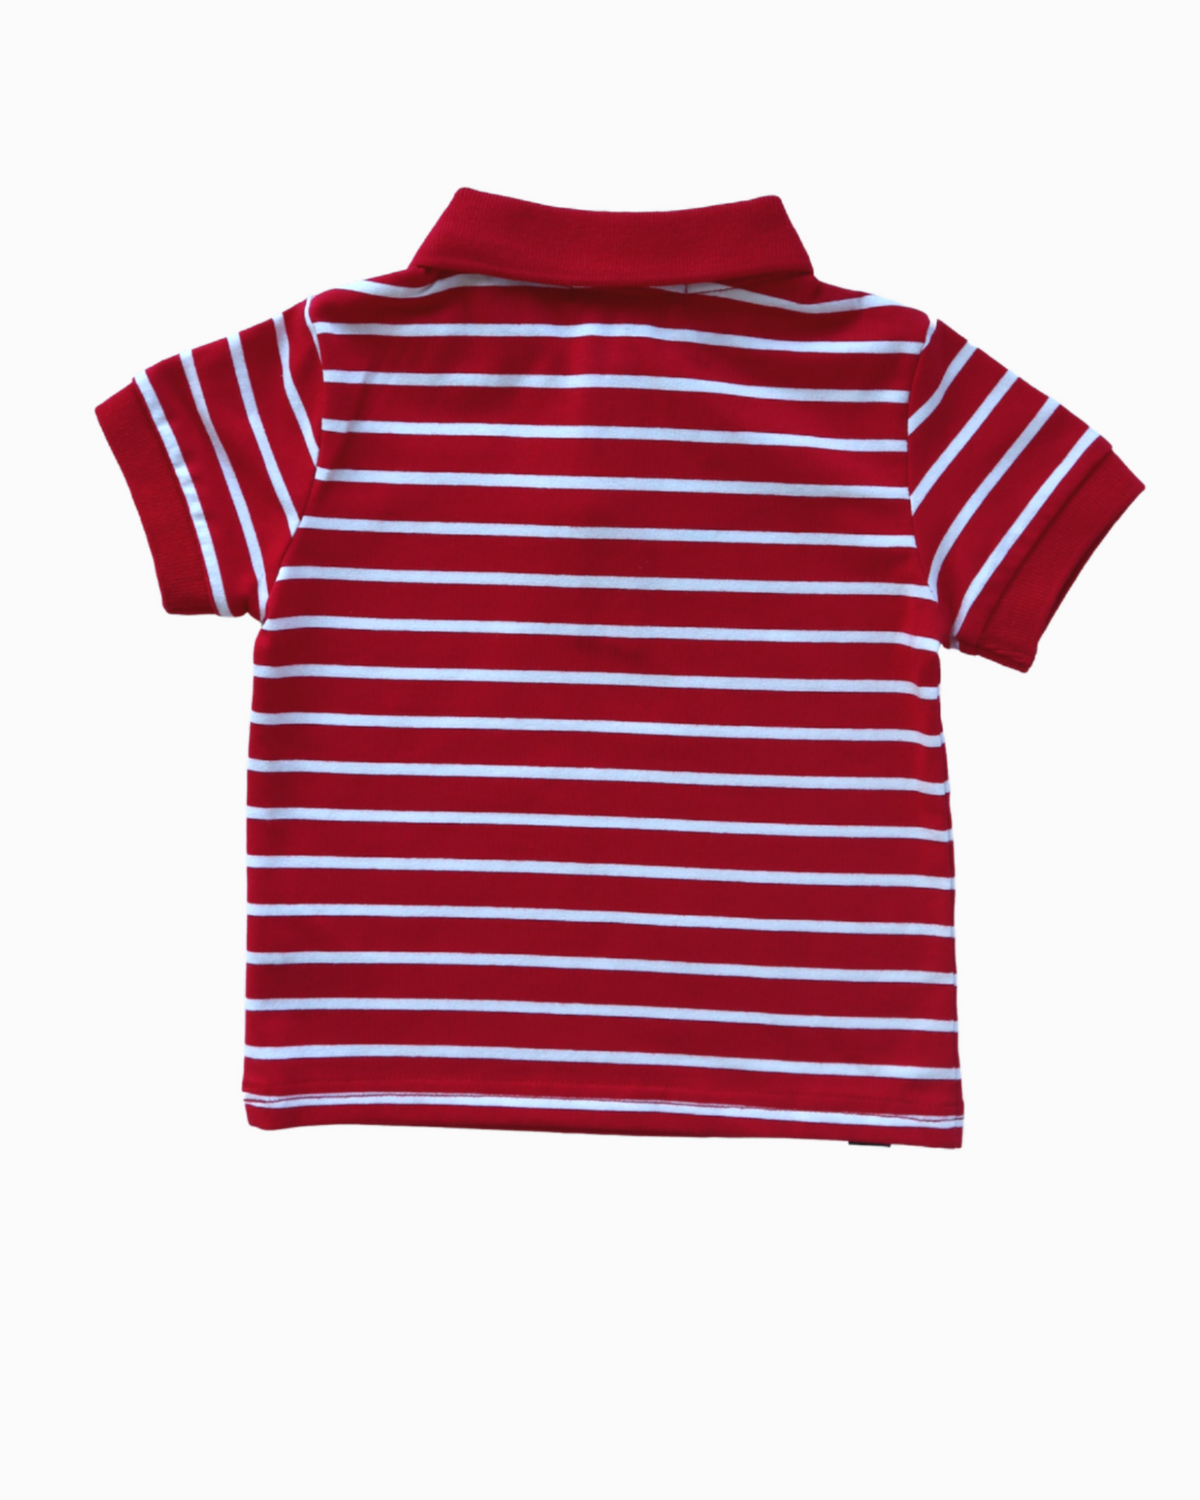 Classic Polo in White and Red Stripe